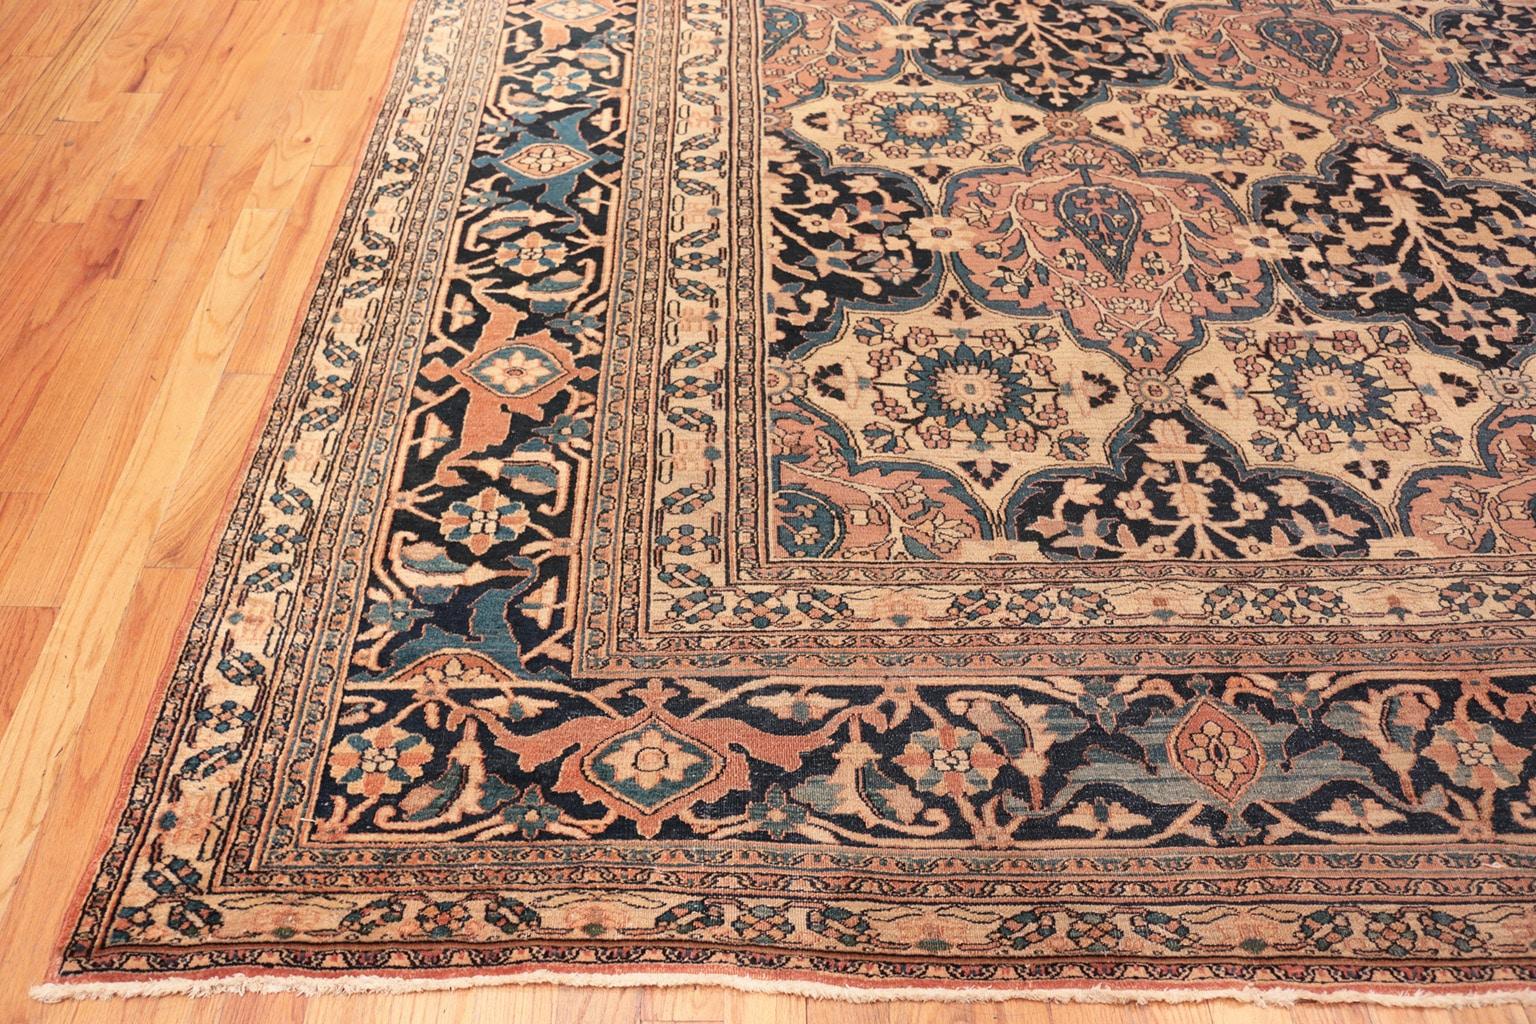 Hand-Knotted Antique Persian Khorassan Rug. Size: 12 ft 4 in x 15 ft 9 in (3.76 m x 4.8 m)